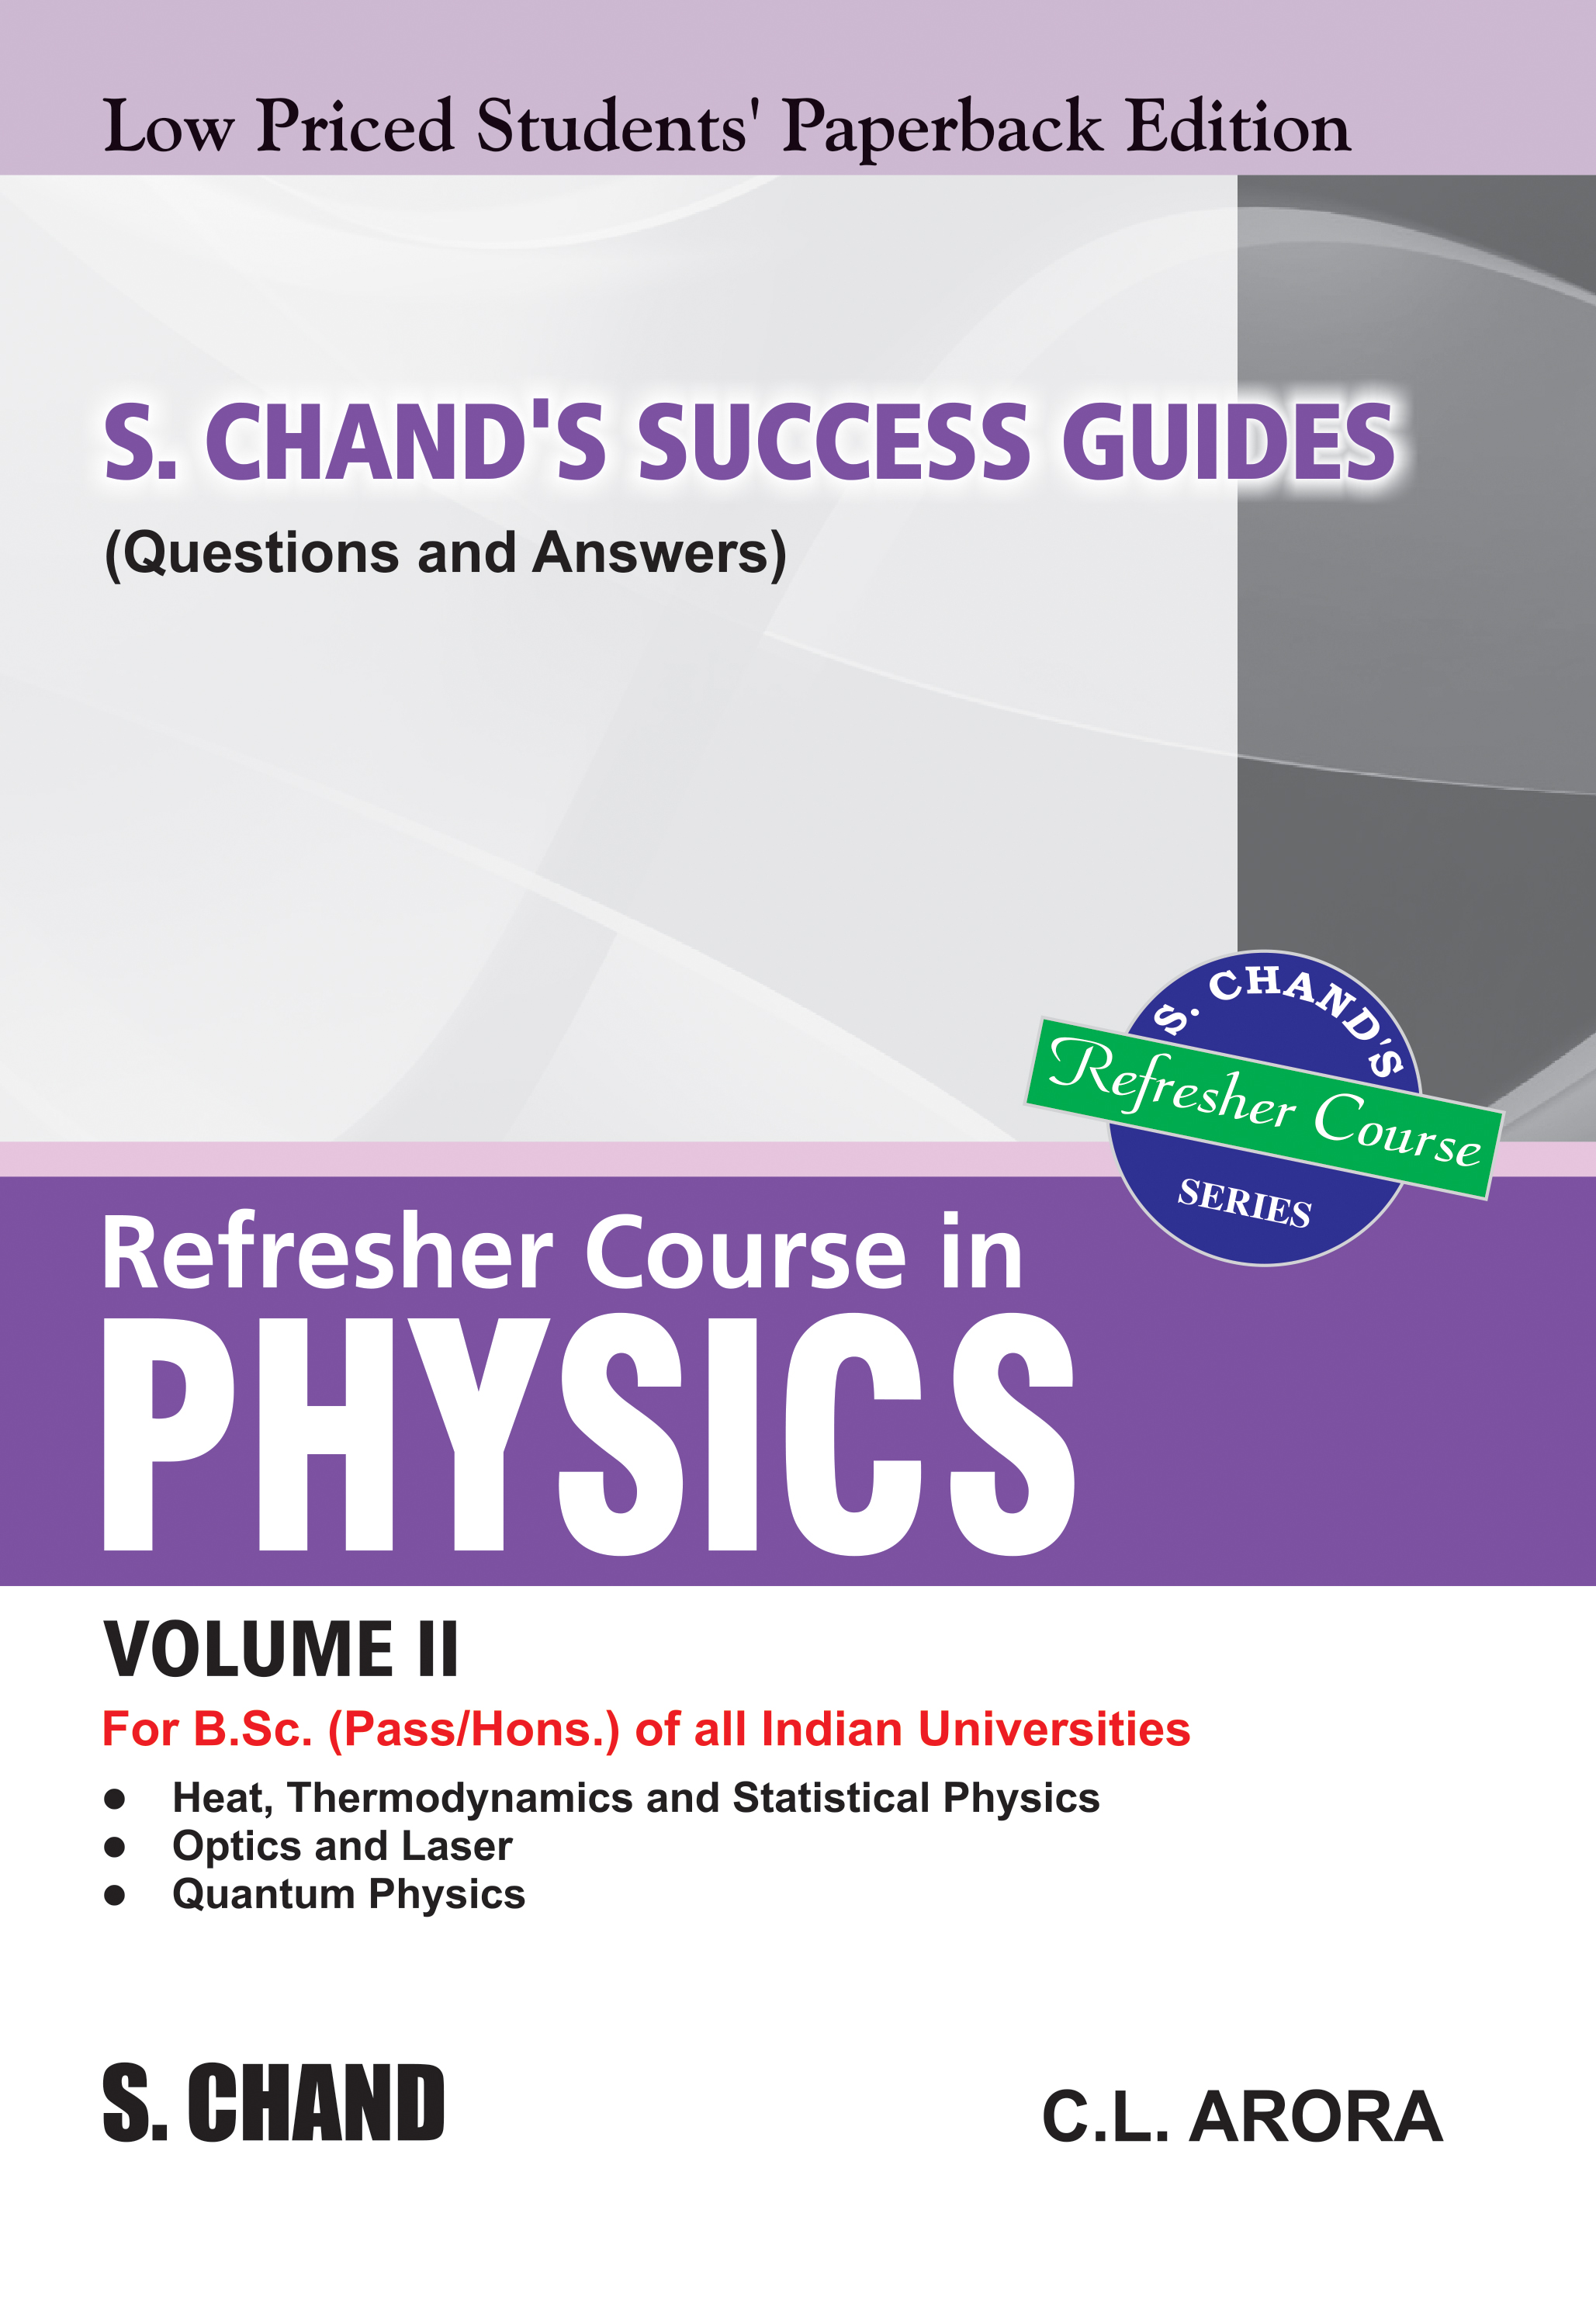 Refresher Course in B.Sc. Physics Vol. II (LPSPE)